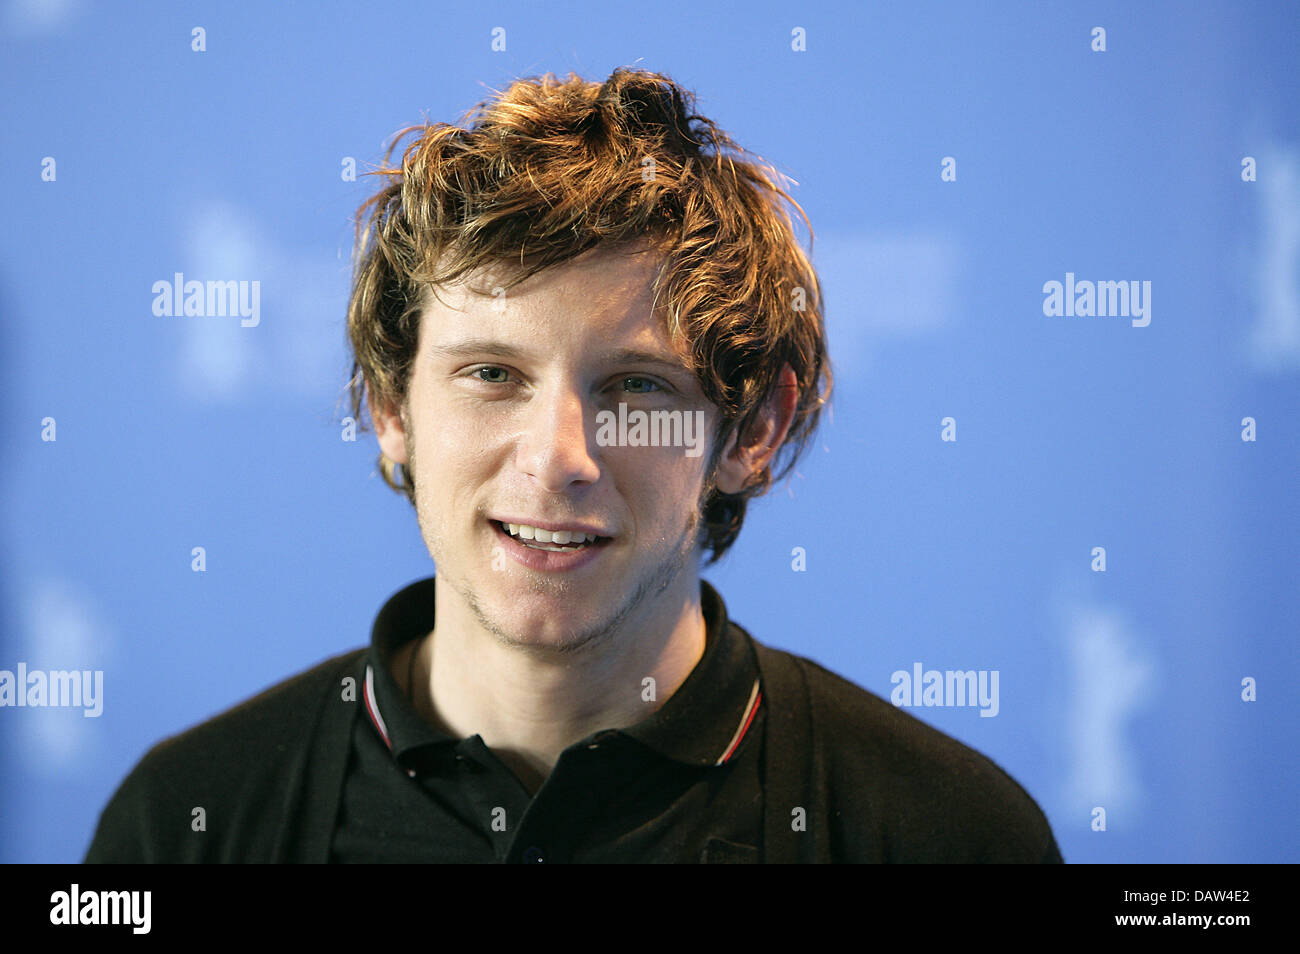 British actor Jamie Bell pictured at a photo call for his film  'Hallam Foe' at the 57th Berlinale International Film Festival of Berlin, Germany, Friday, 16 February 2007. Photo: Peer Grimm Stock Photo